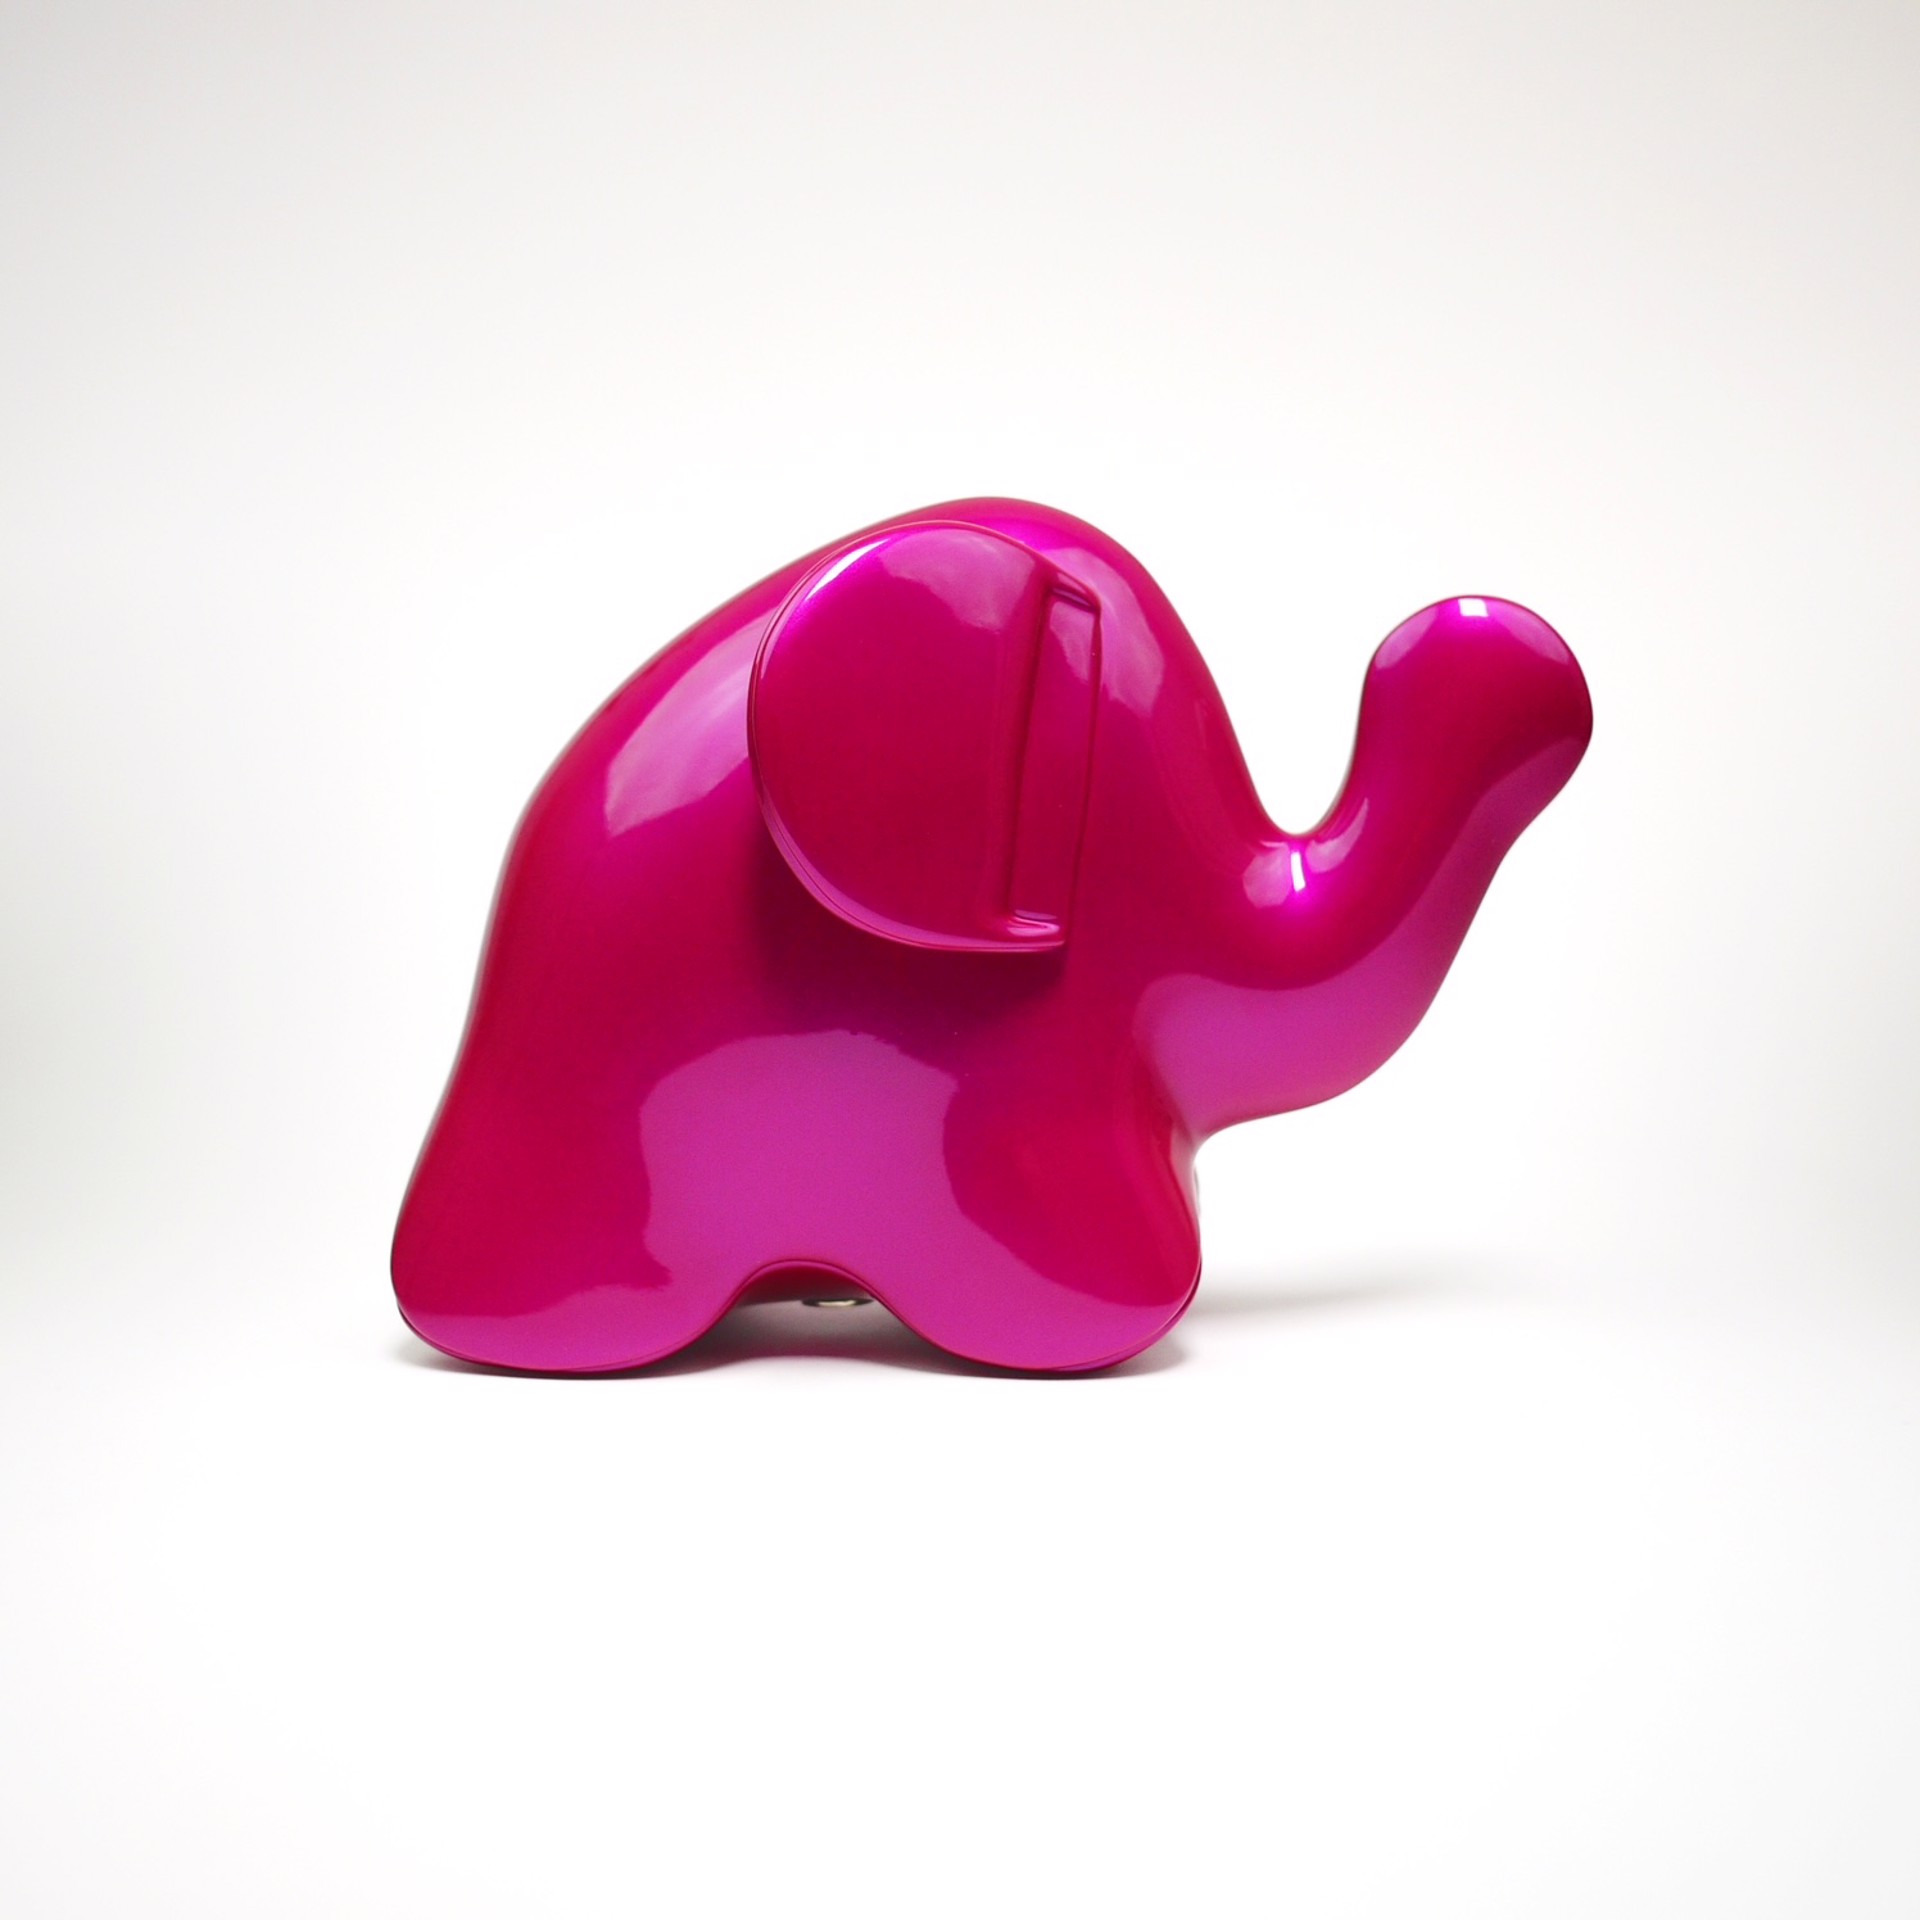 Lucky Elephant (Pink) by Christopher Schulz